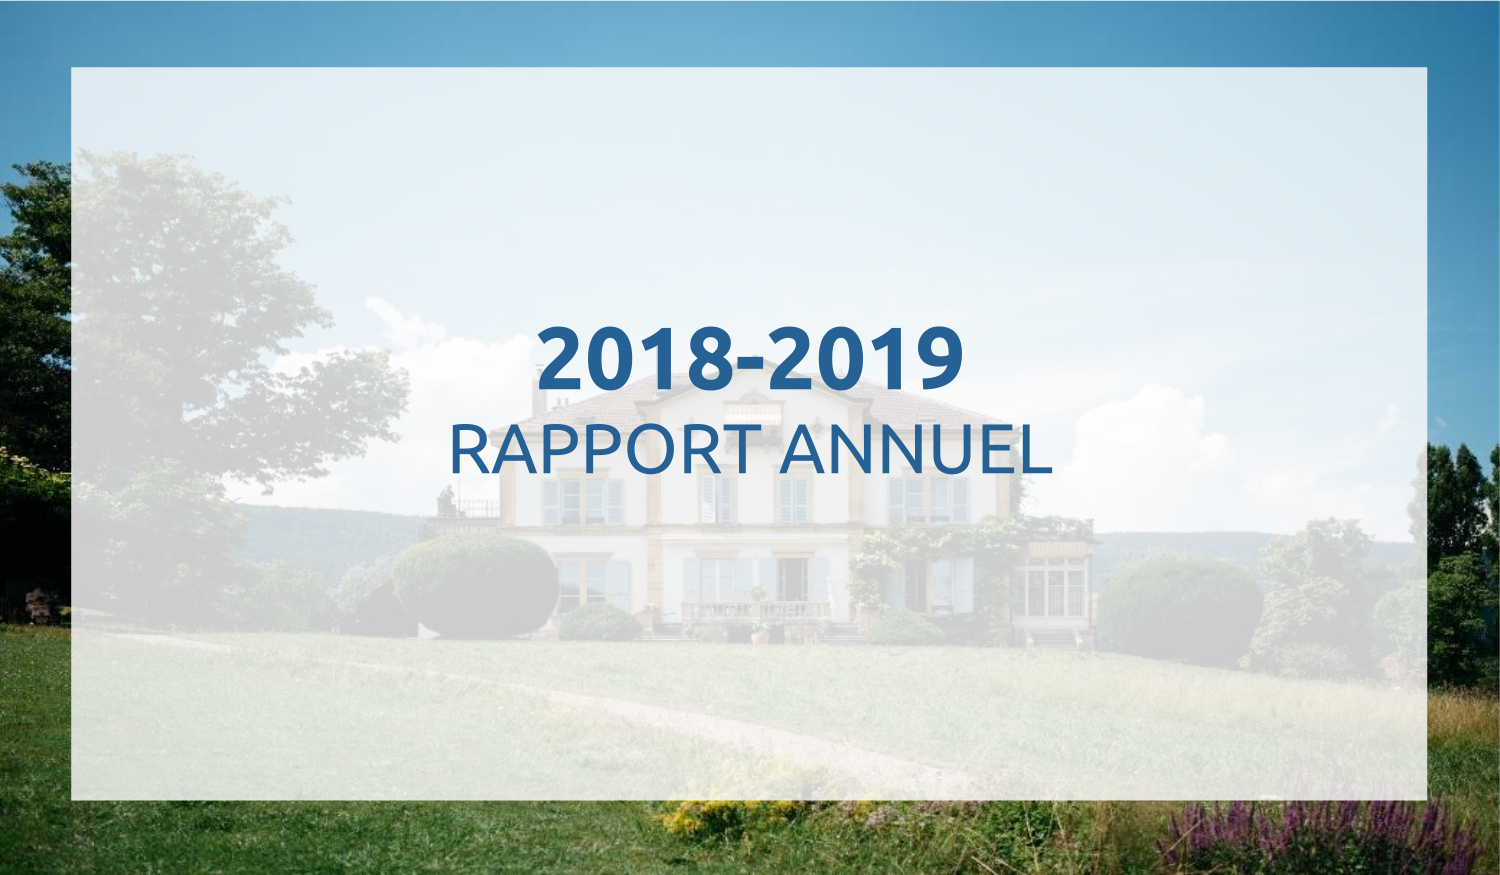 Rapport annuel 2018-2019_PerspectivePlus 6